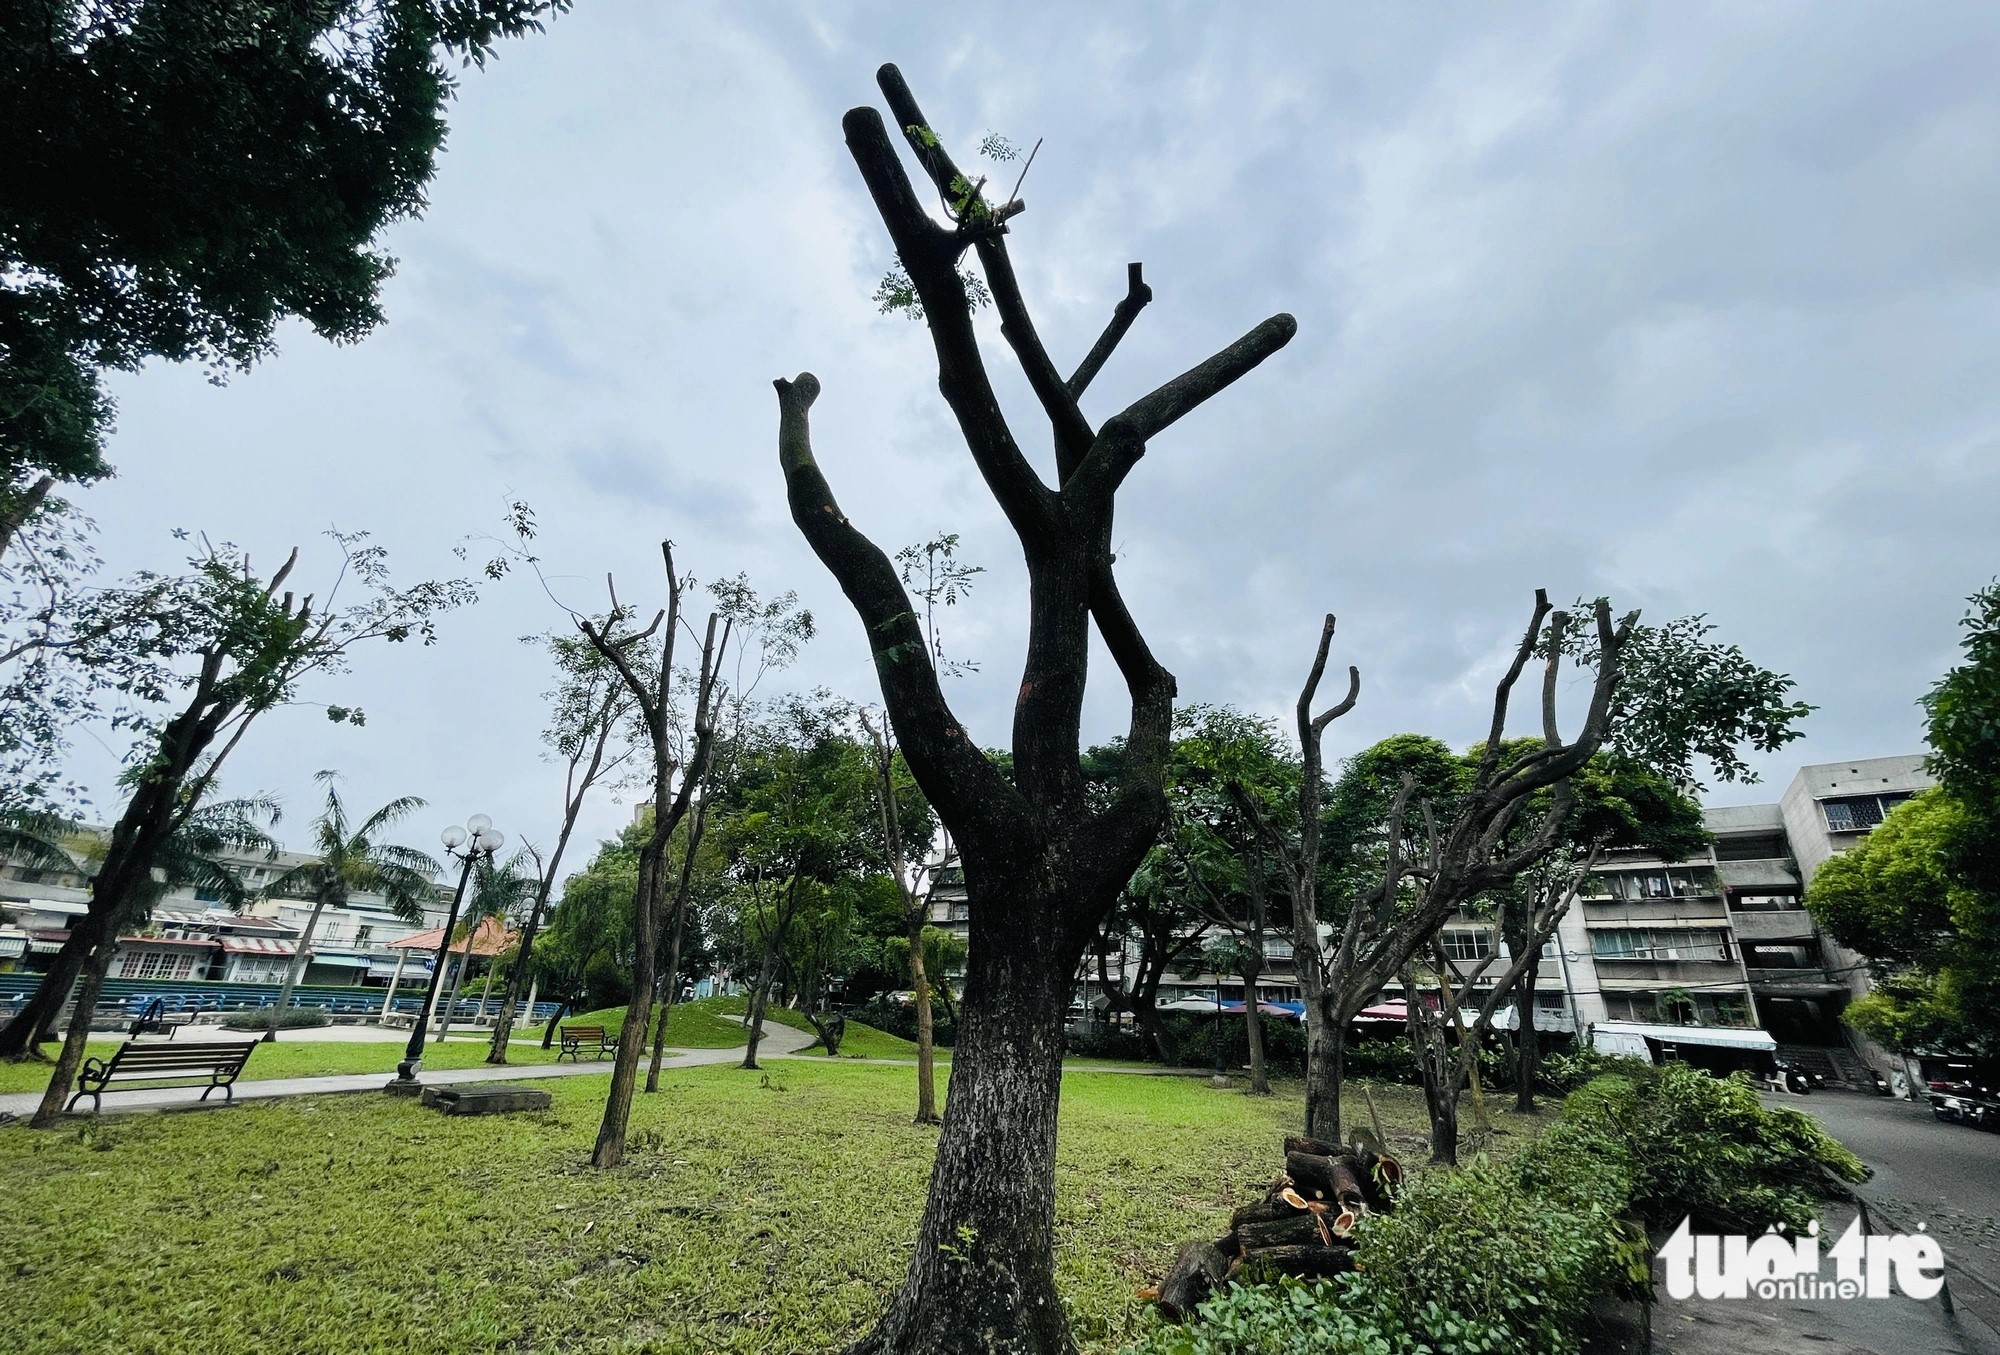 In Thanh Da Park in Binh Thanh District, some large branches after being pruned before the annual rainy season. Photo: Le Phan / Tuoi Tre